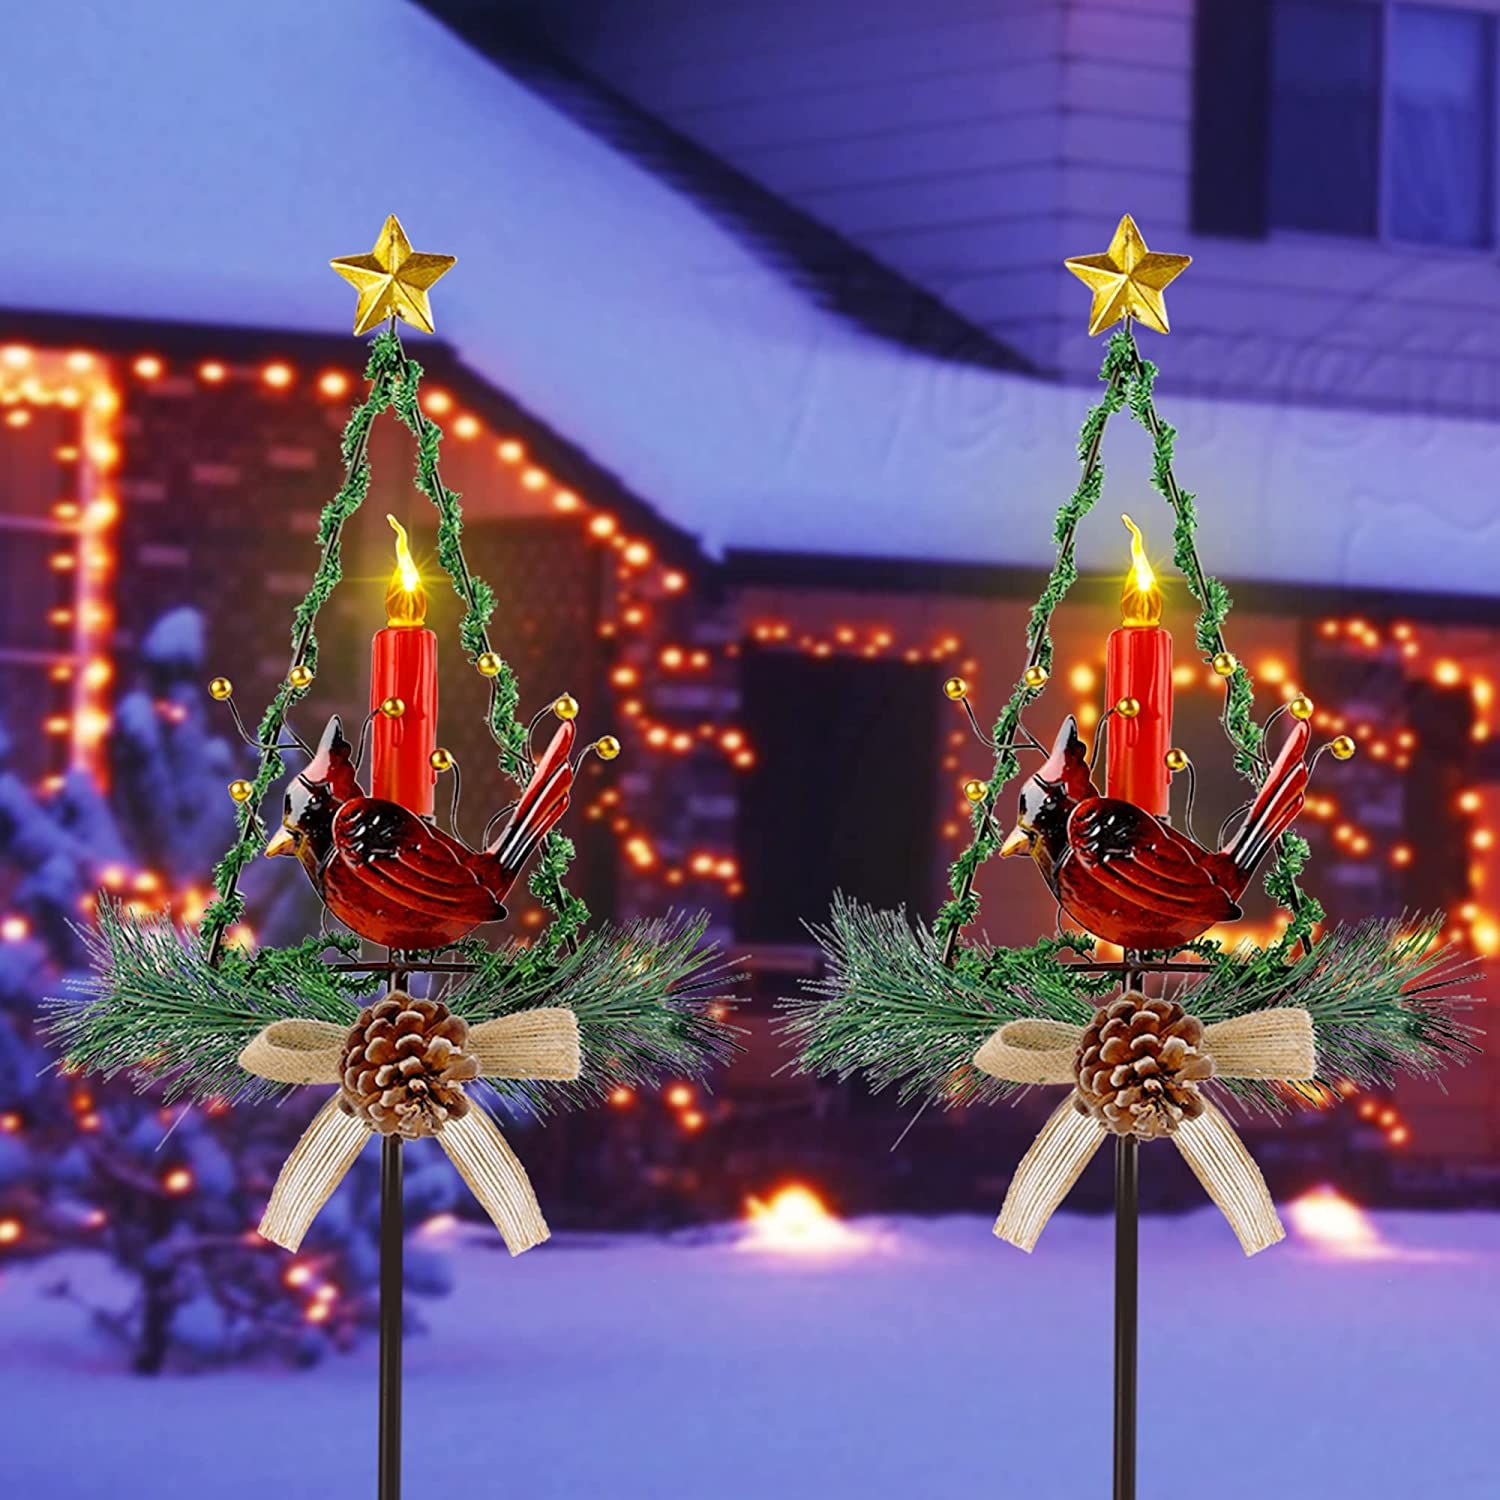 Best Christmas Tree Yard Decorations in 2021